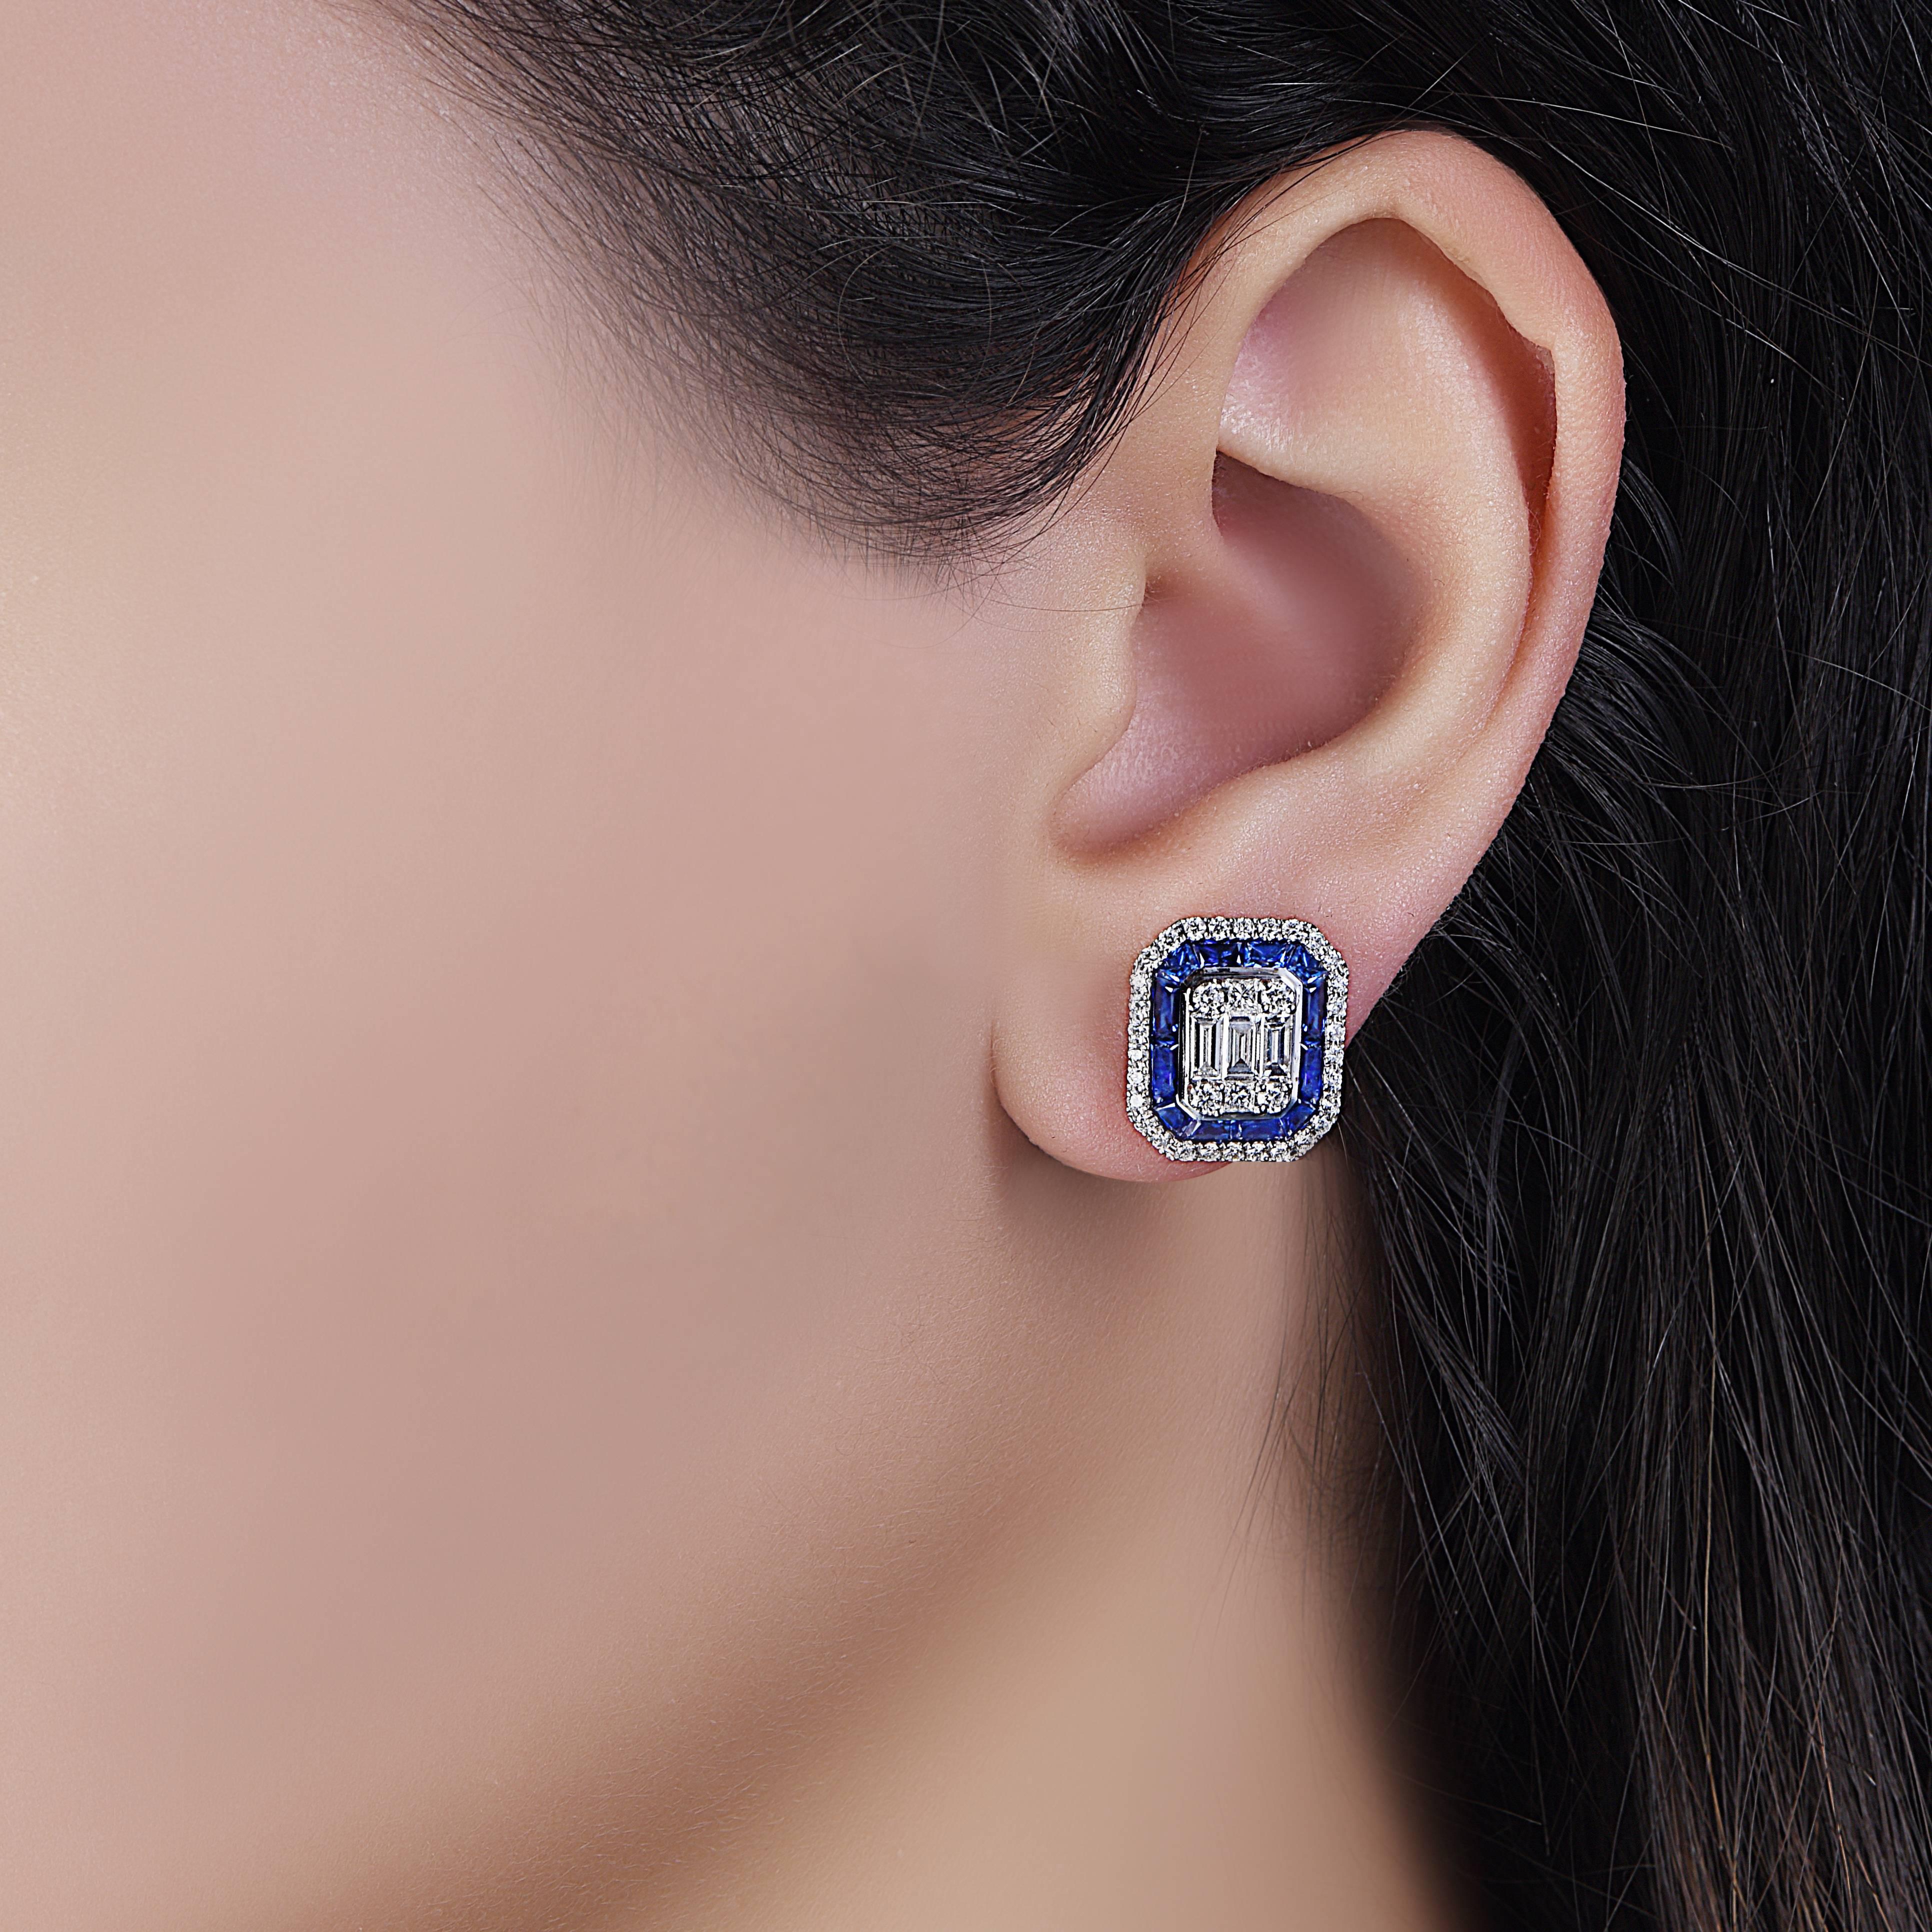 Approx total weight: 3.30ct 
Diamond Color: E-F
Diamond Clarity: Vvs 1.22cts
Sapphire quality: Rich Royal blue gorgeous sapphires 2.08cts
Cut: Excellent 
As noted we are vetted and rated a Top Seller on 1stdibs falling into the top 25% of dealers